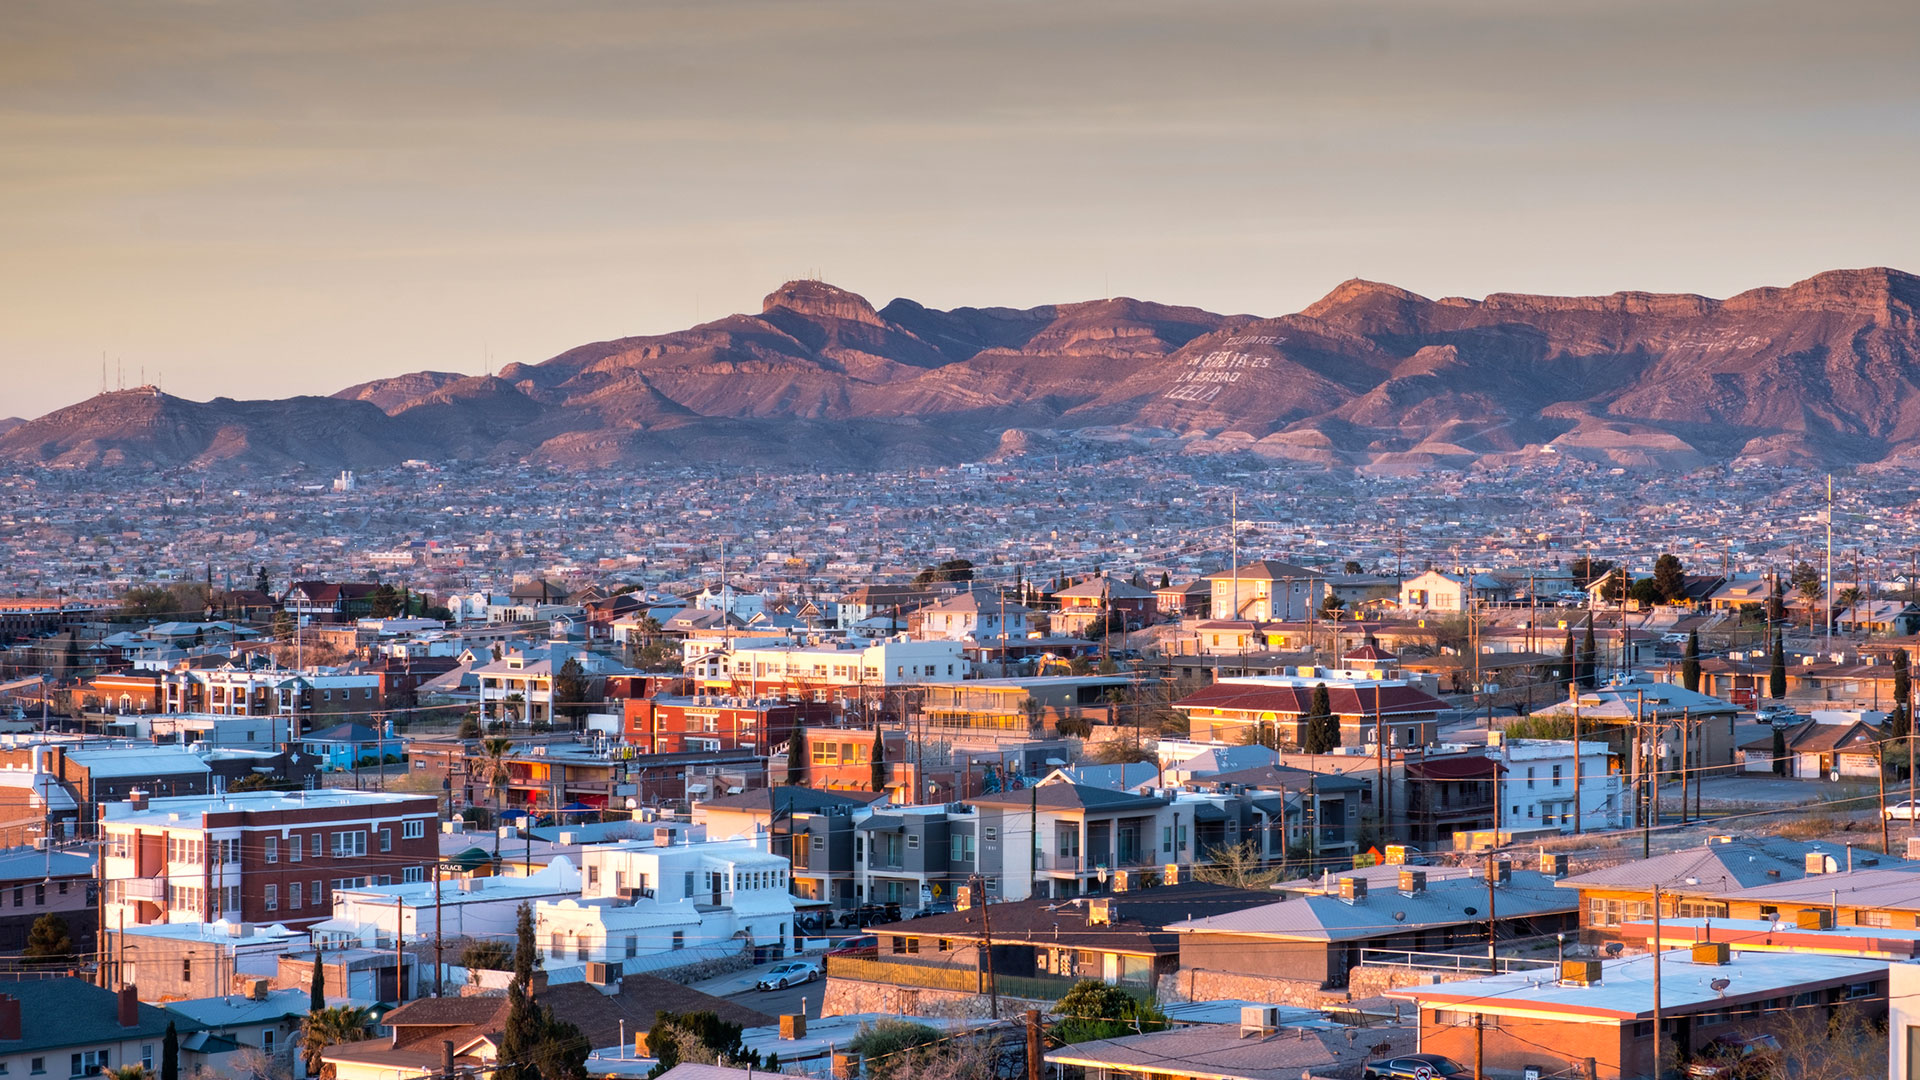 El Paso, Texas, is located near the border with Mexico and is a place where it is possible to buy a home at reasonable prices